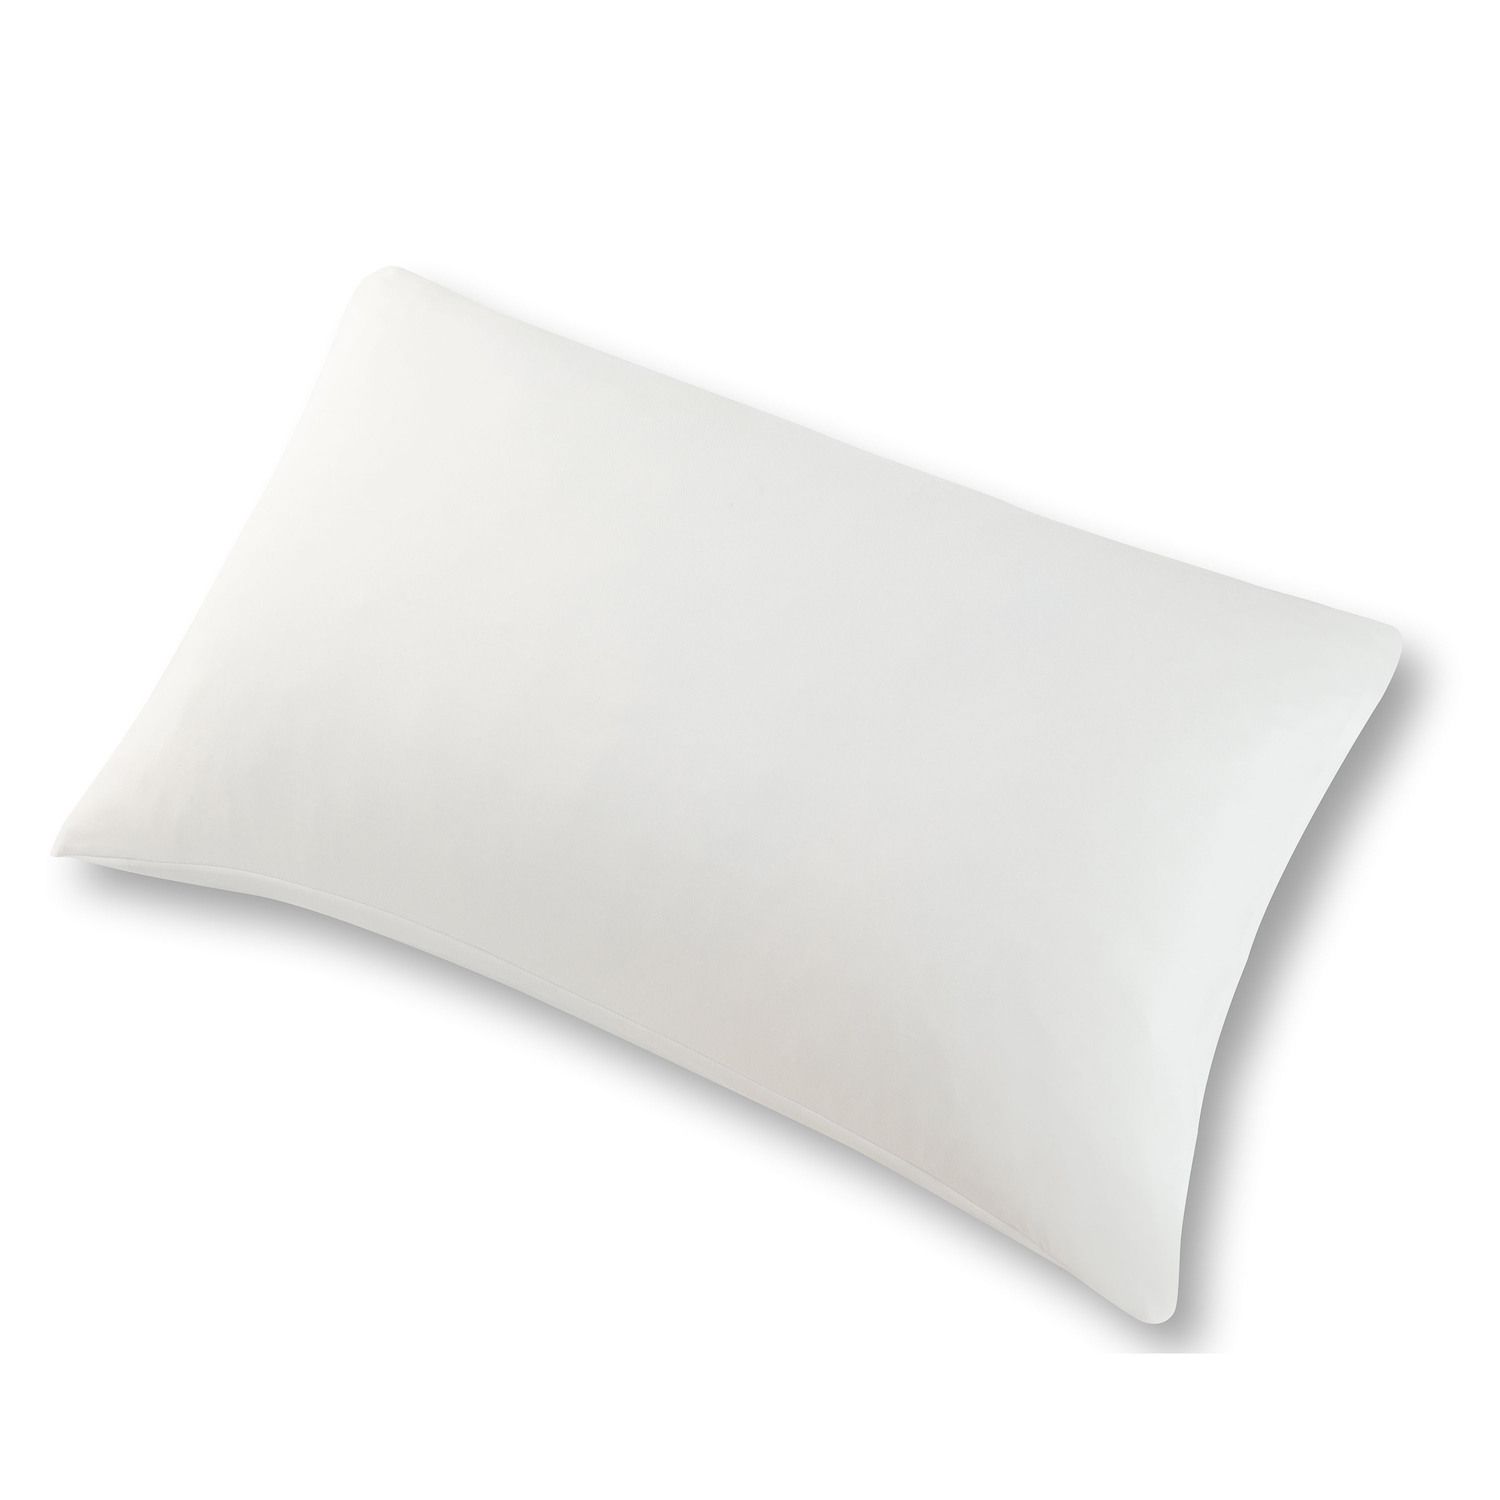 Image for Dream Lab Aroma-Therapy Lavender Scented Sleep Pillow at Kohl's.